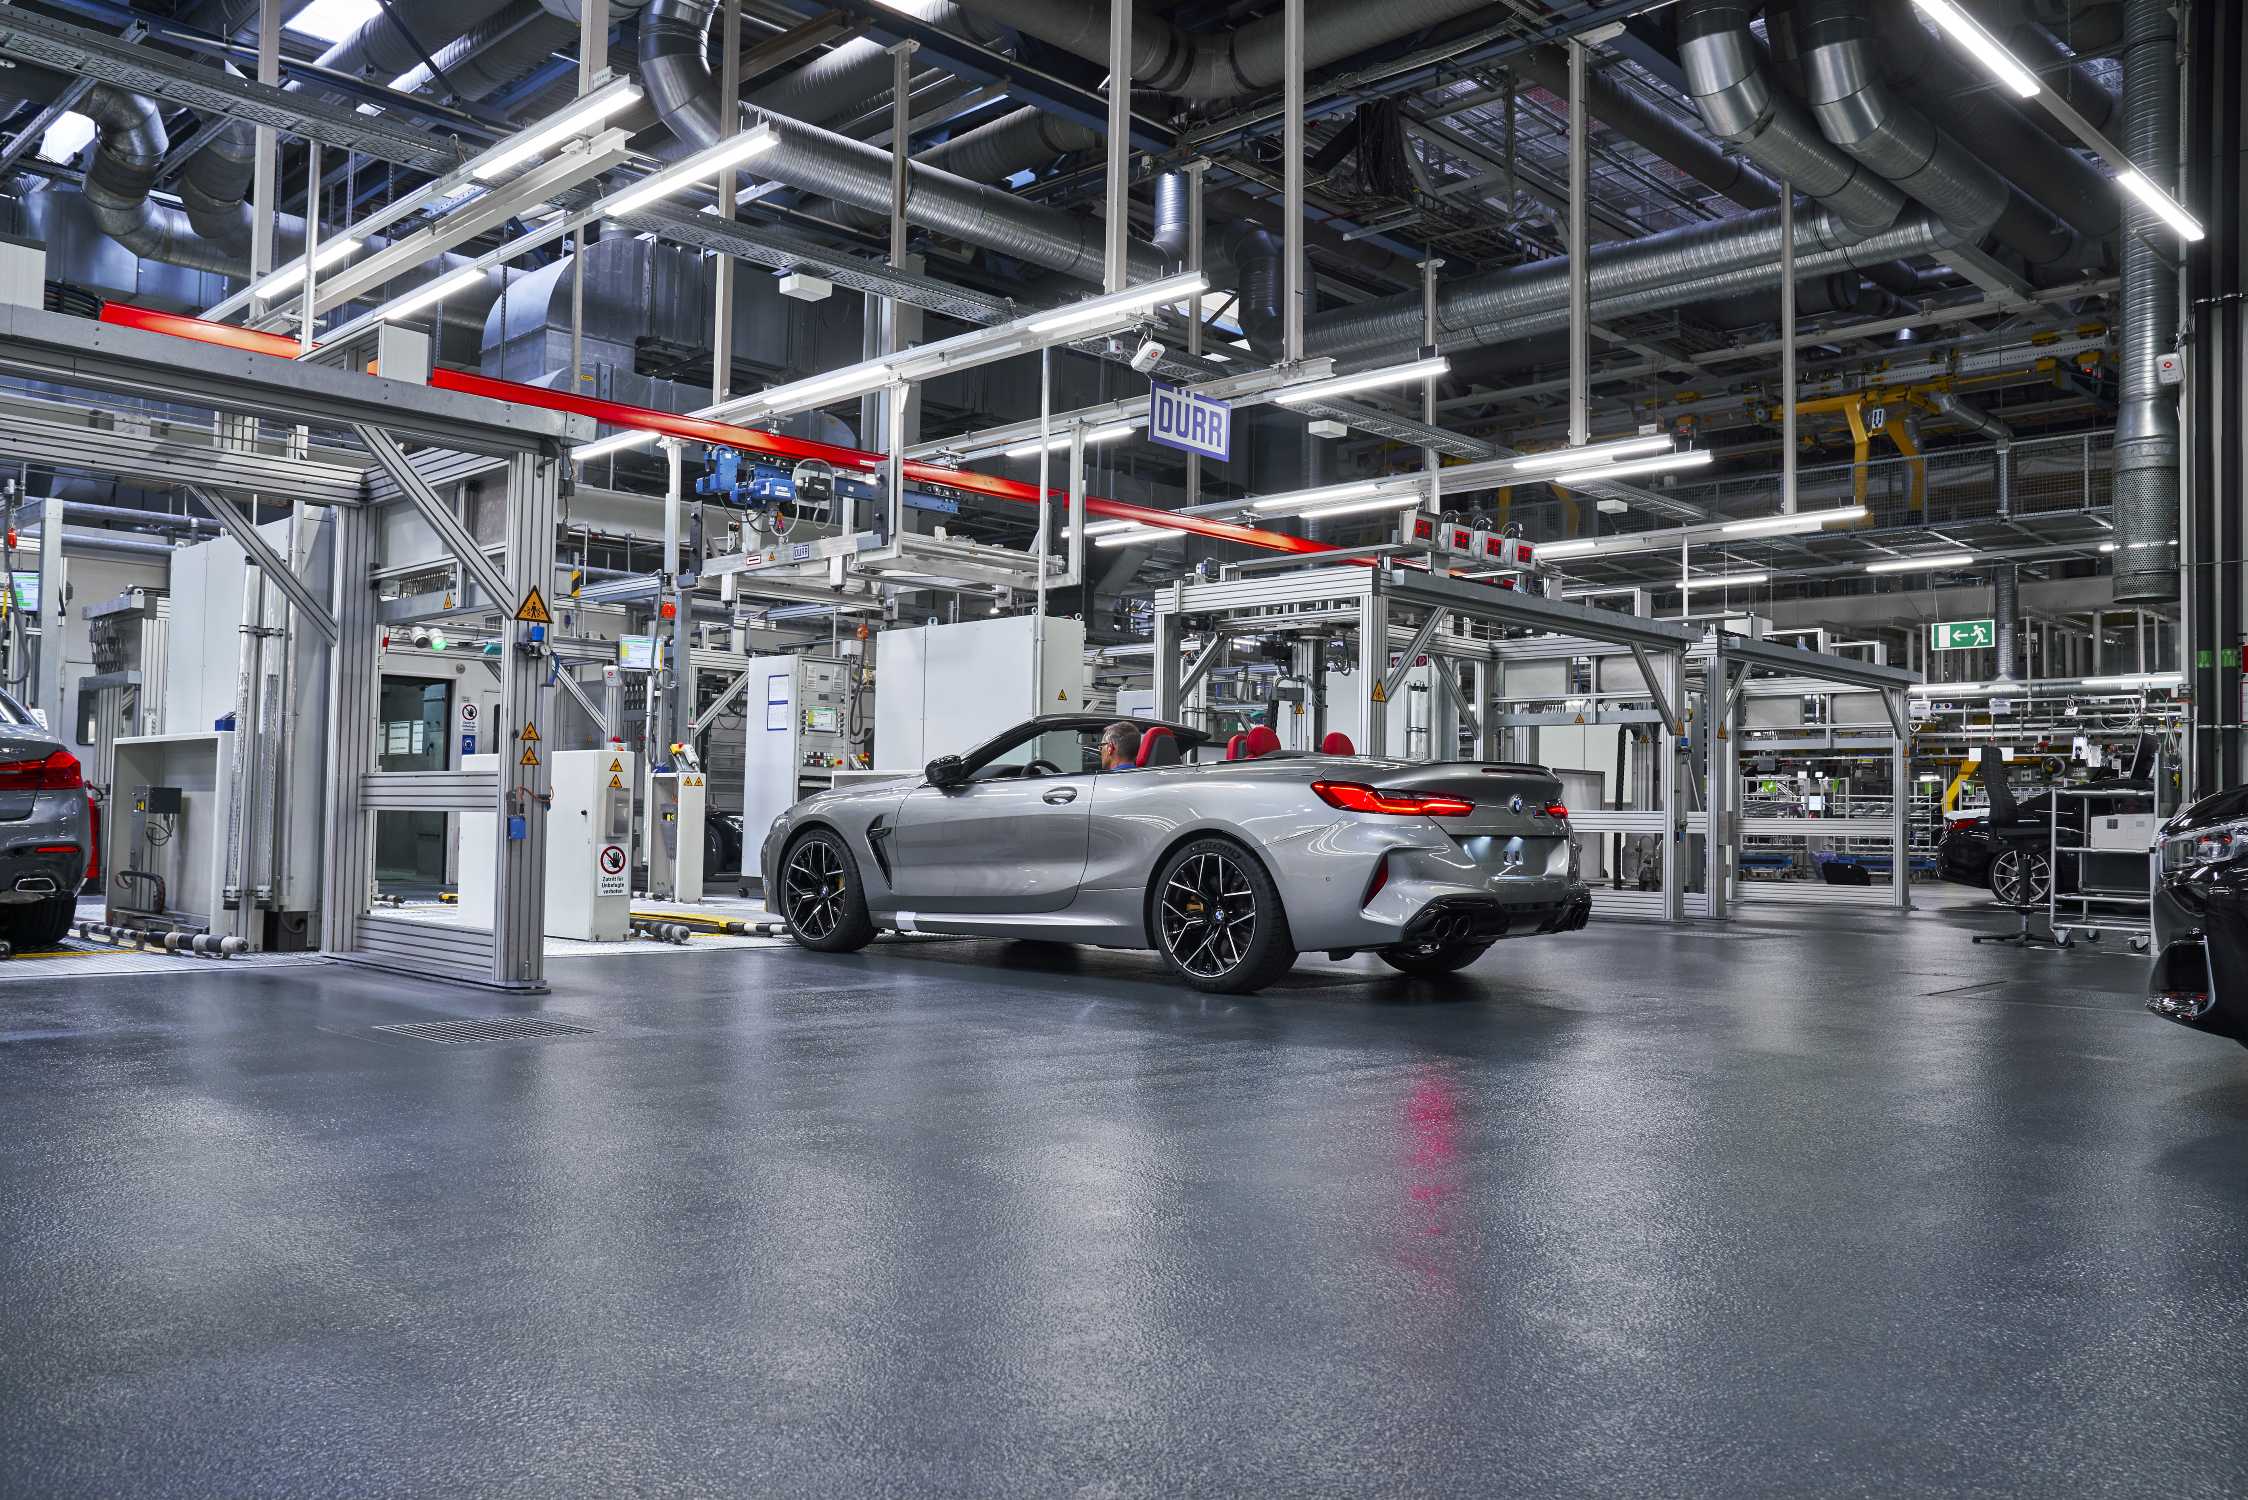 The new BMW M8 Competition Cabriolet in the finish and test area of BMW Group Plant Dingolfing (07/2019)